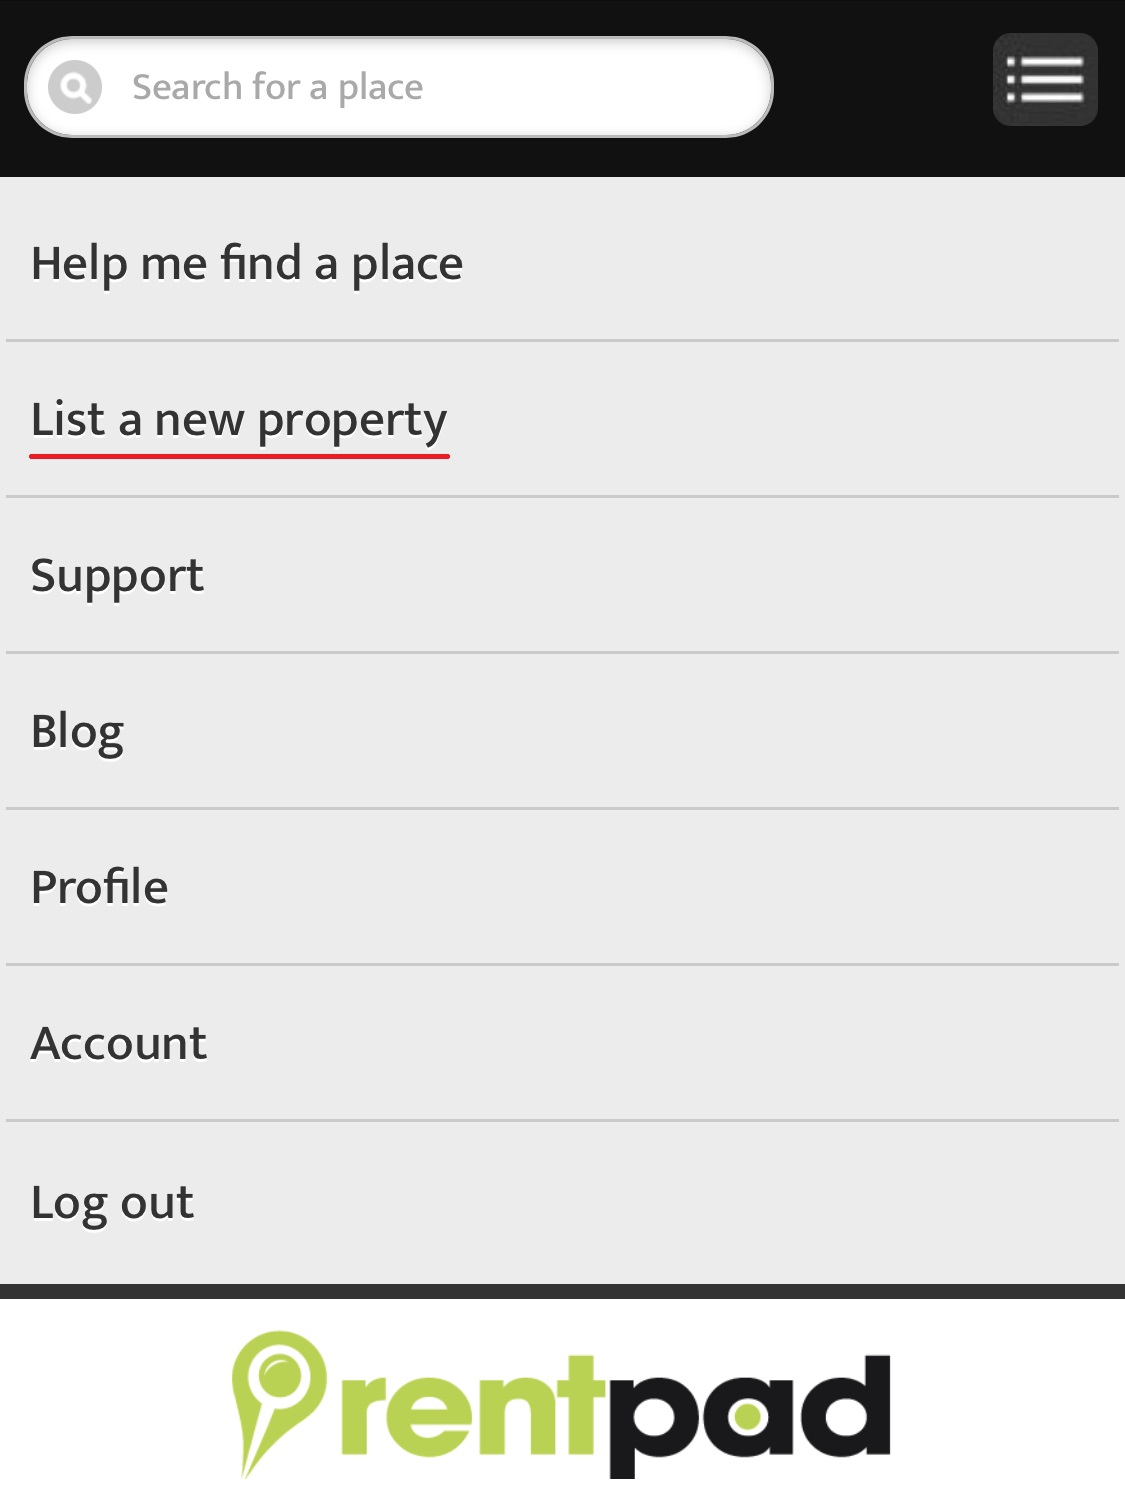 「List a new property」を選択